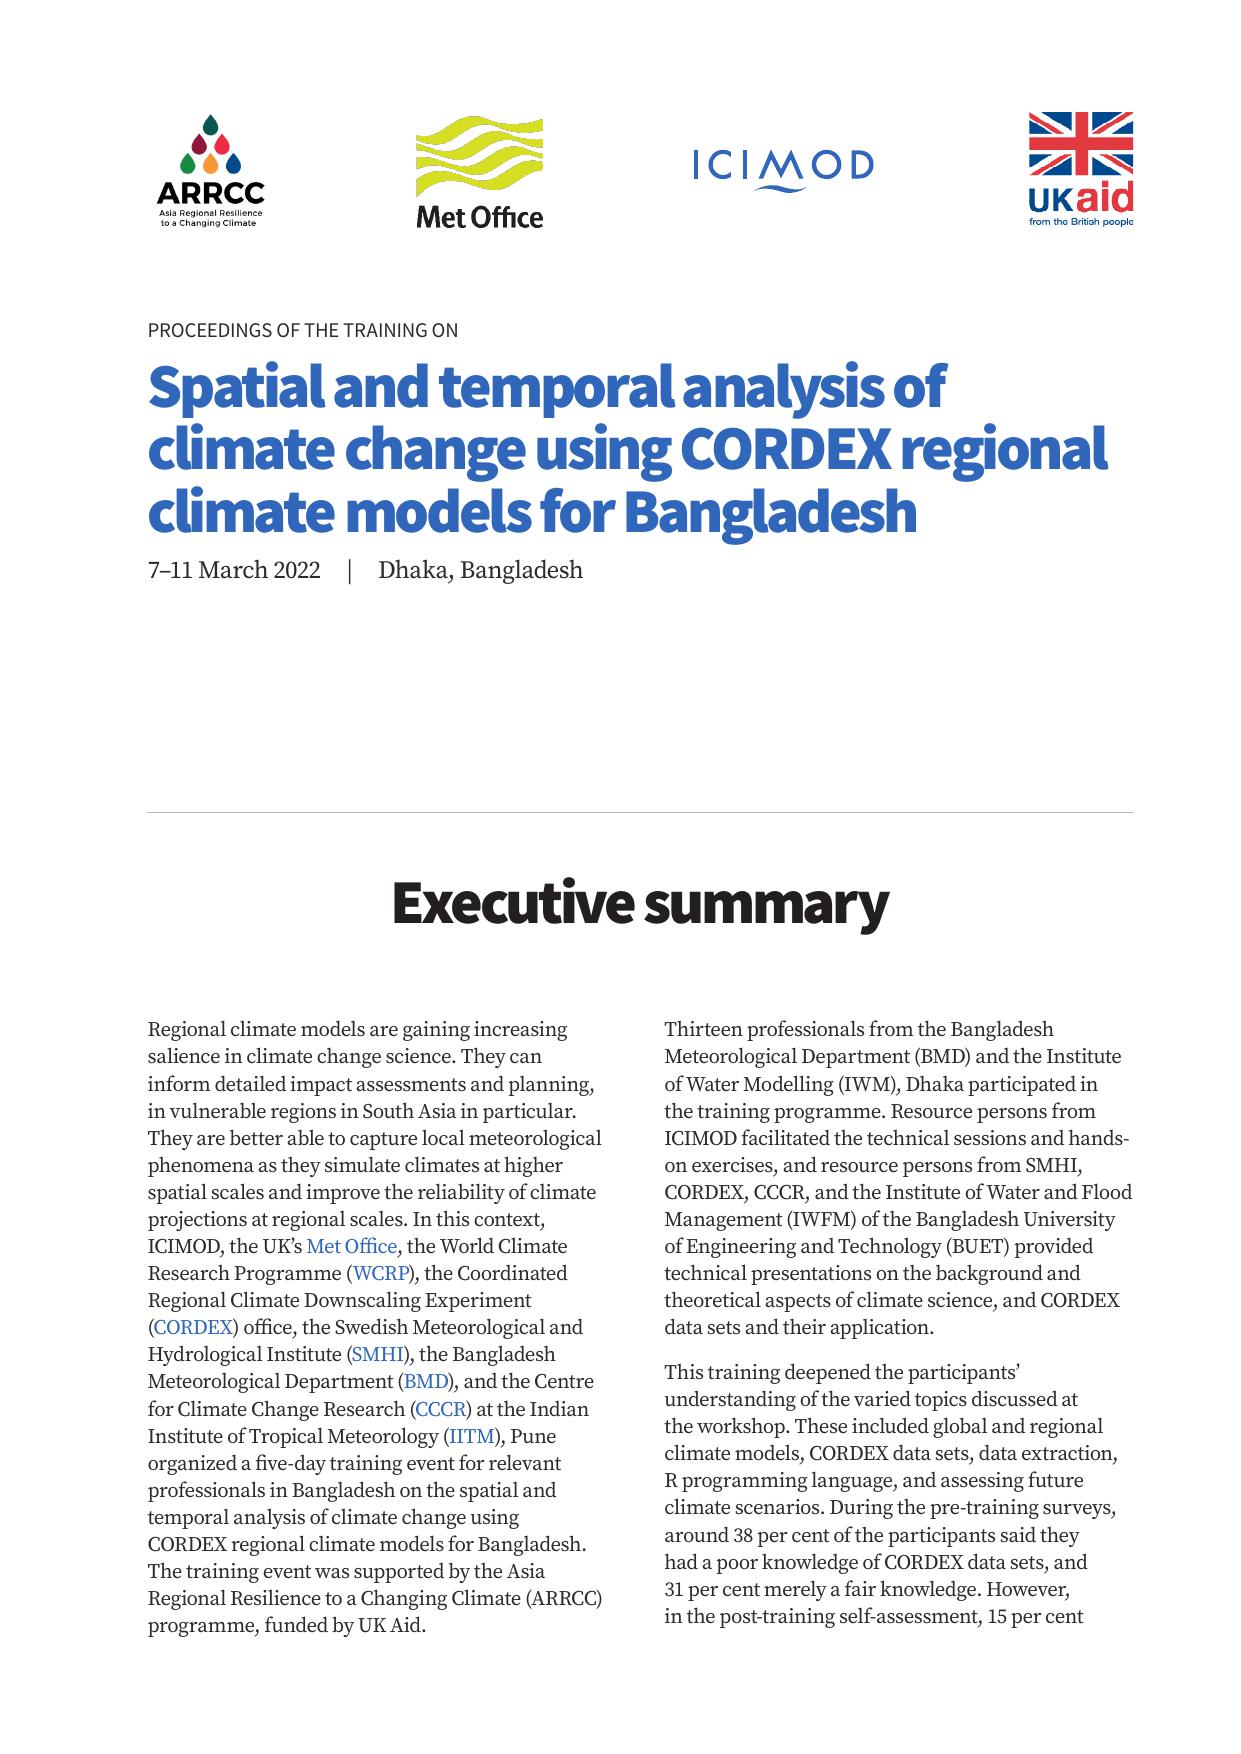 Spatial and temporal analysis of climate change